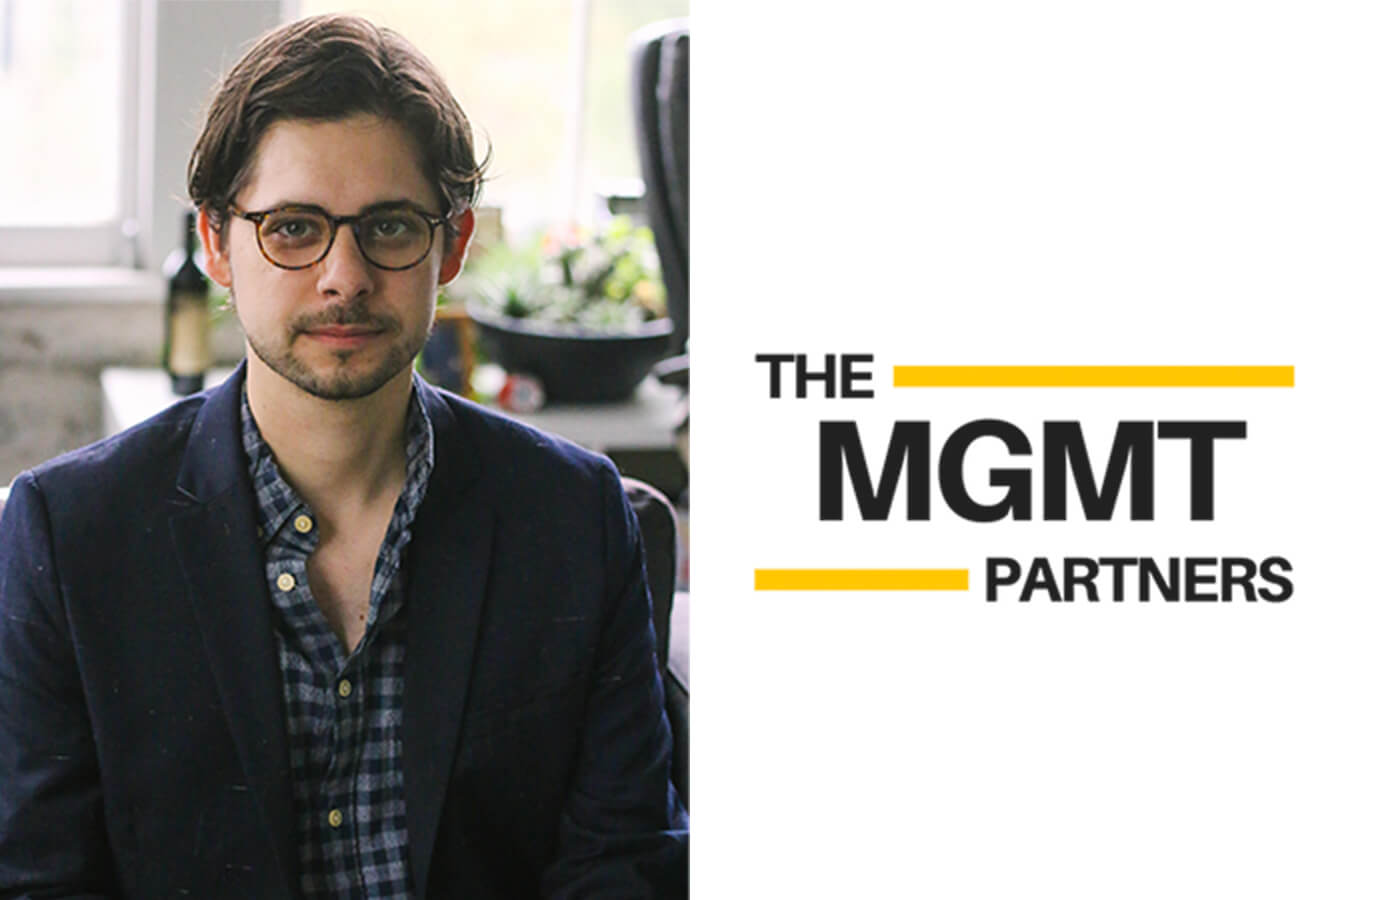 Making Music No Matter What: A Case Study on The MGMT Partners